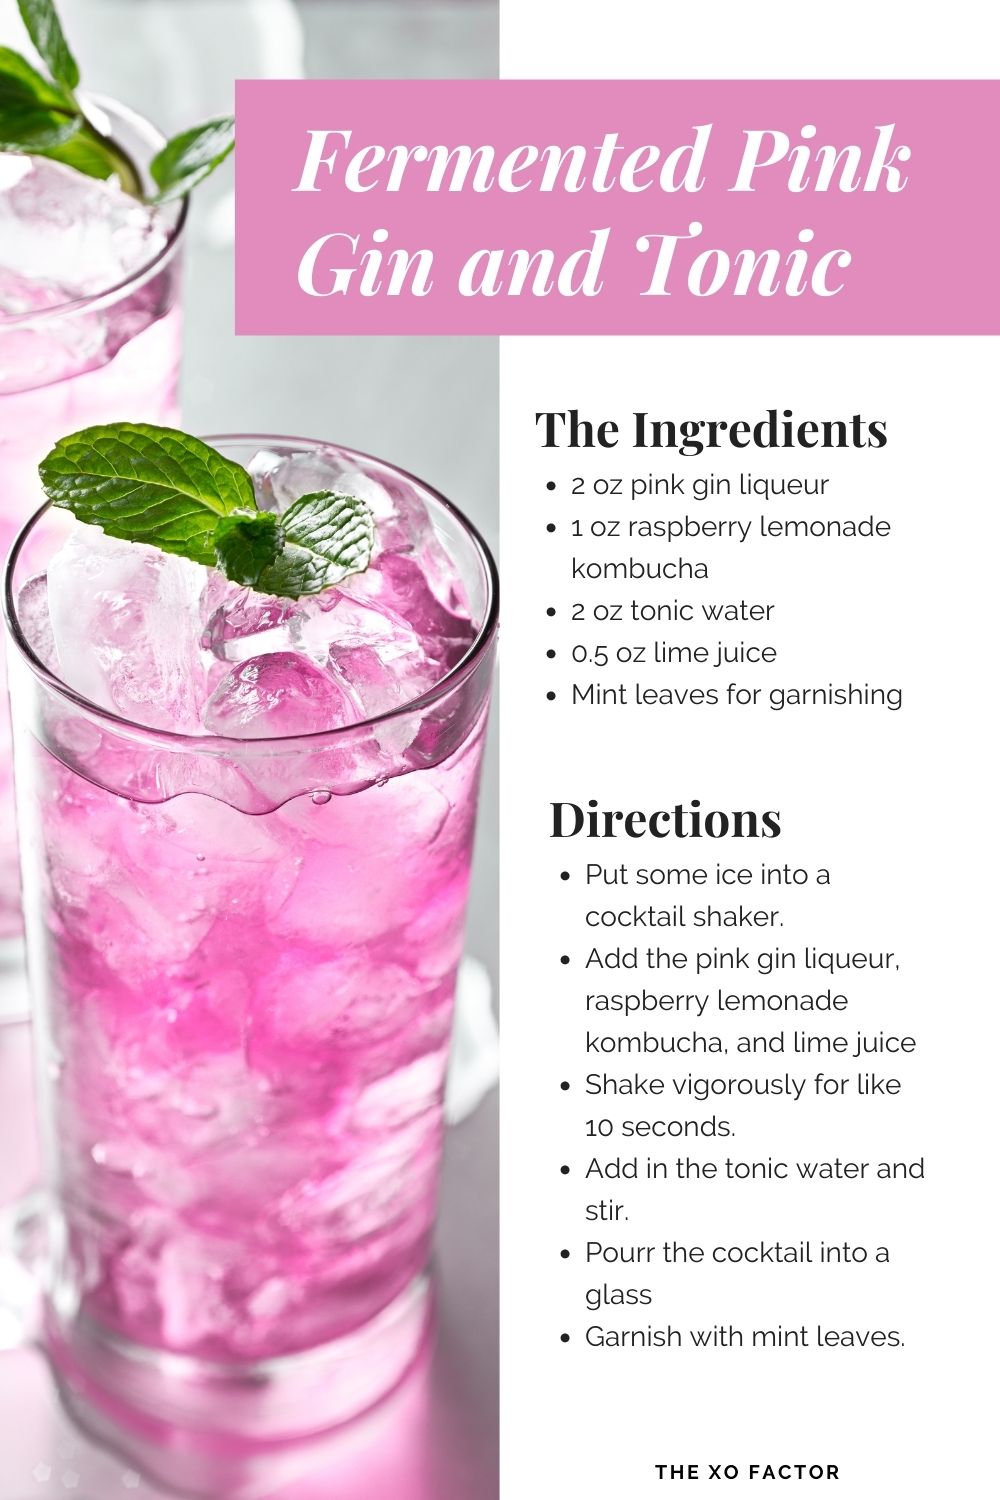 fermented pink gin and tonic recipe